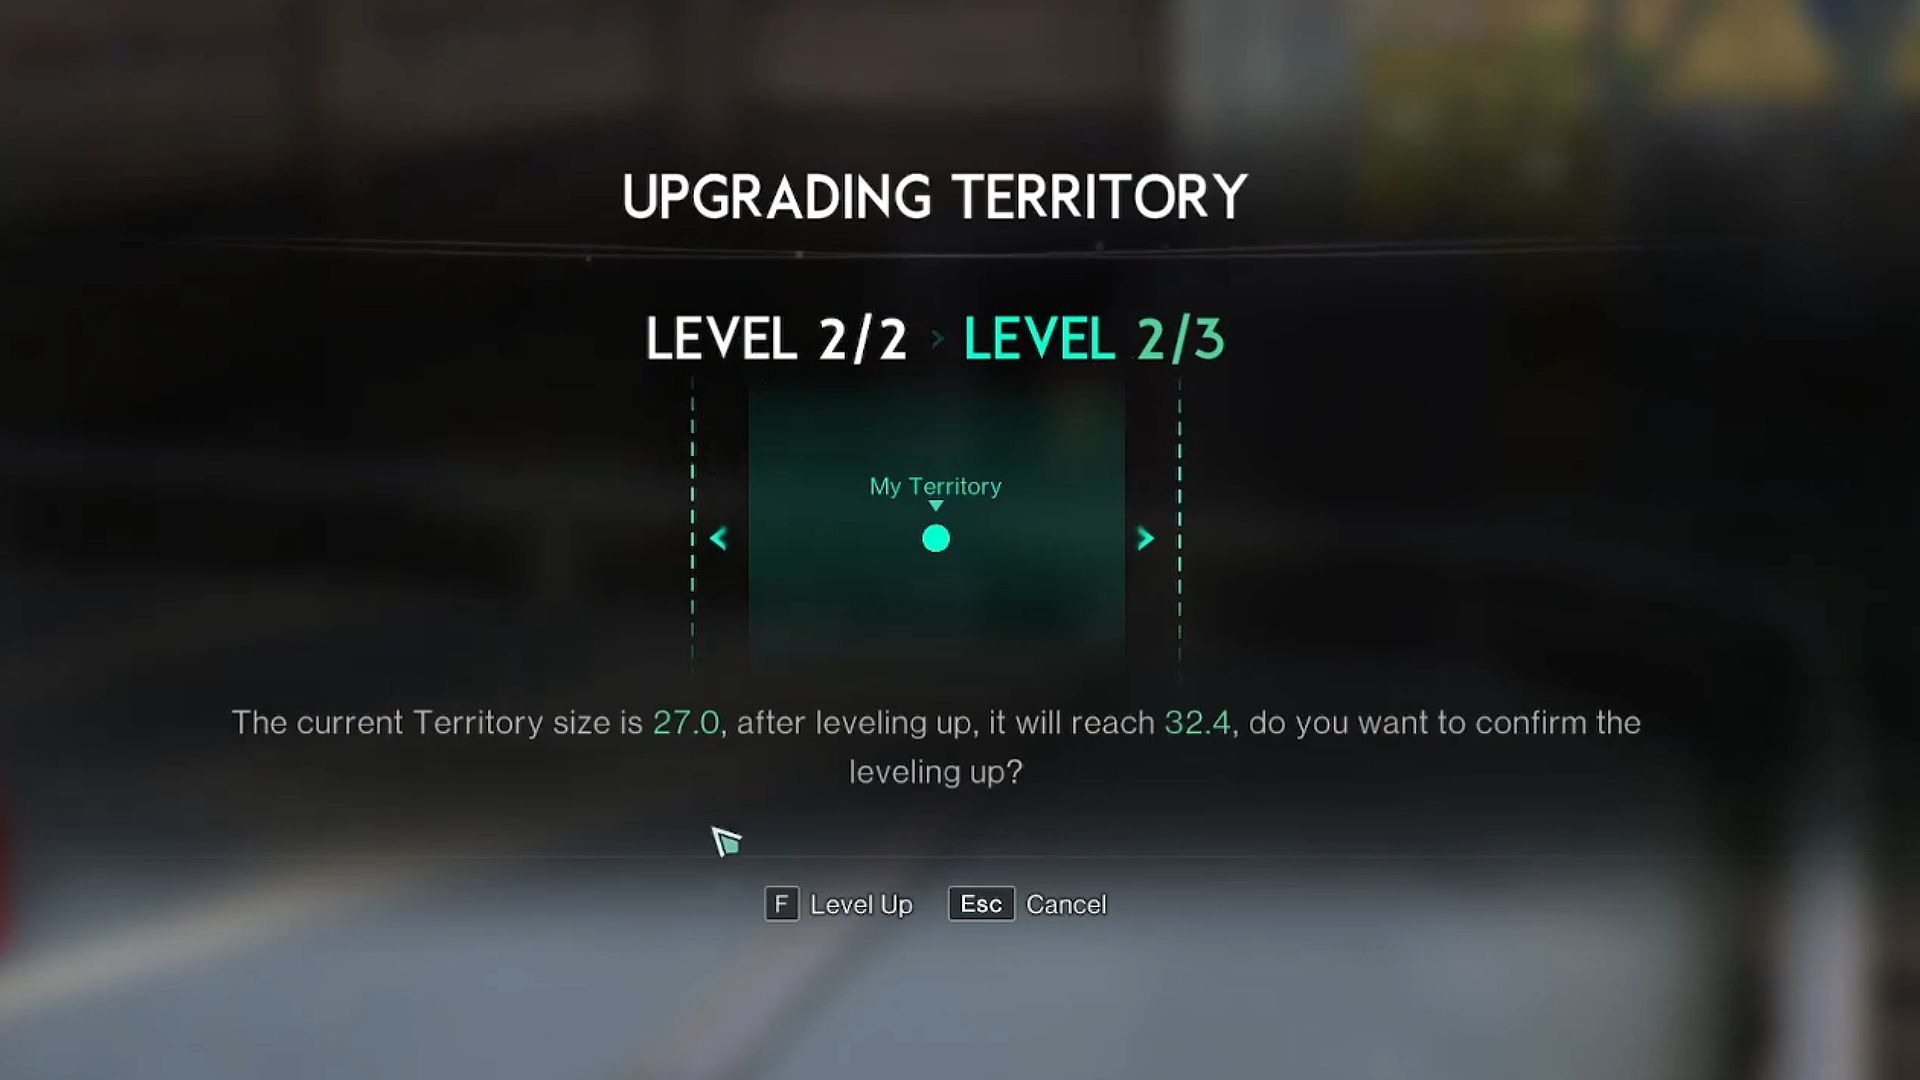 The Territory upgrade screen in Once Human